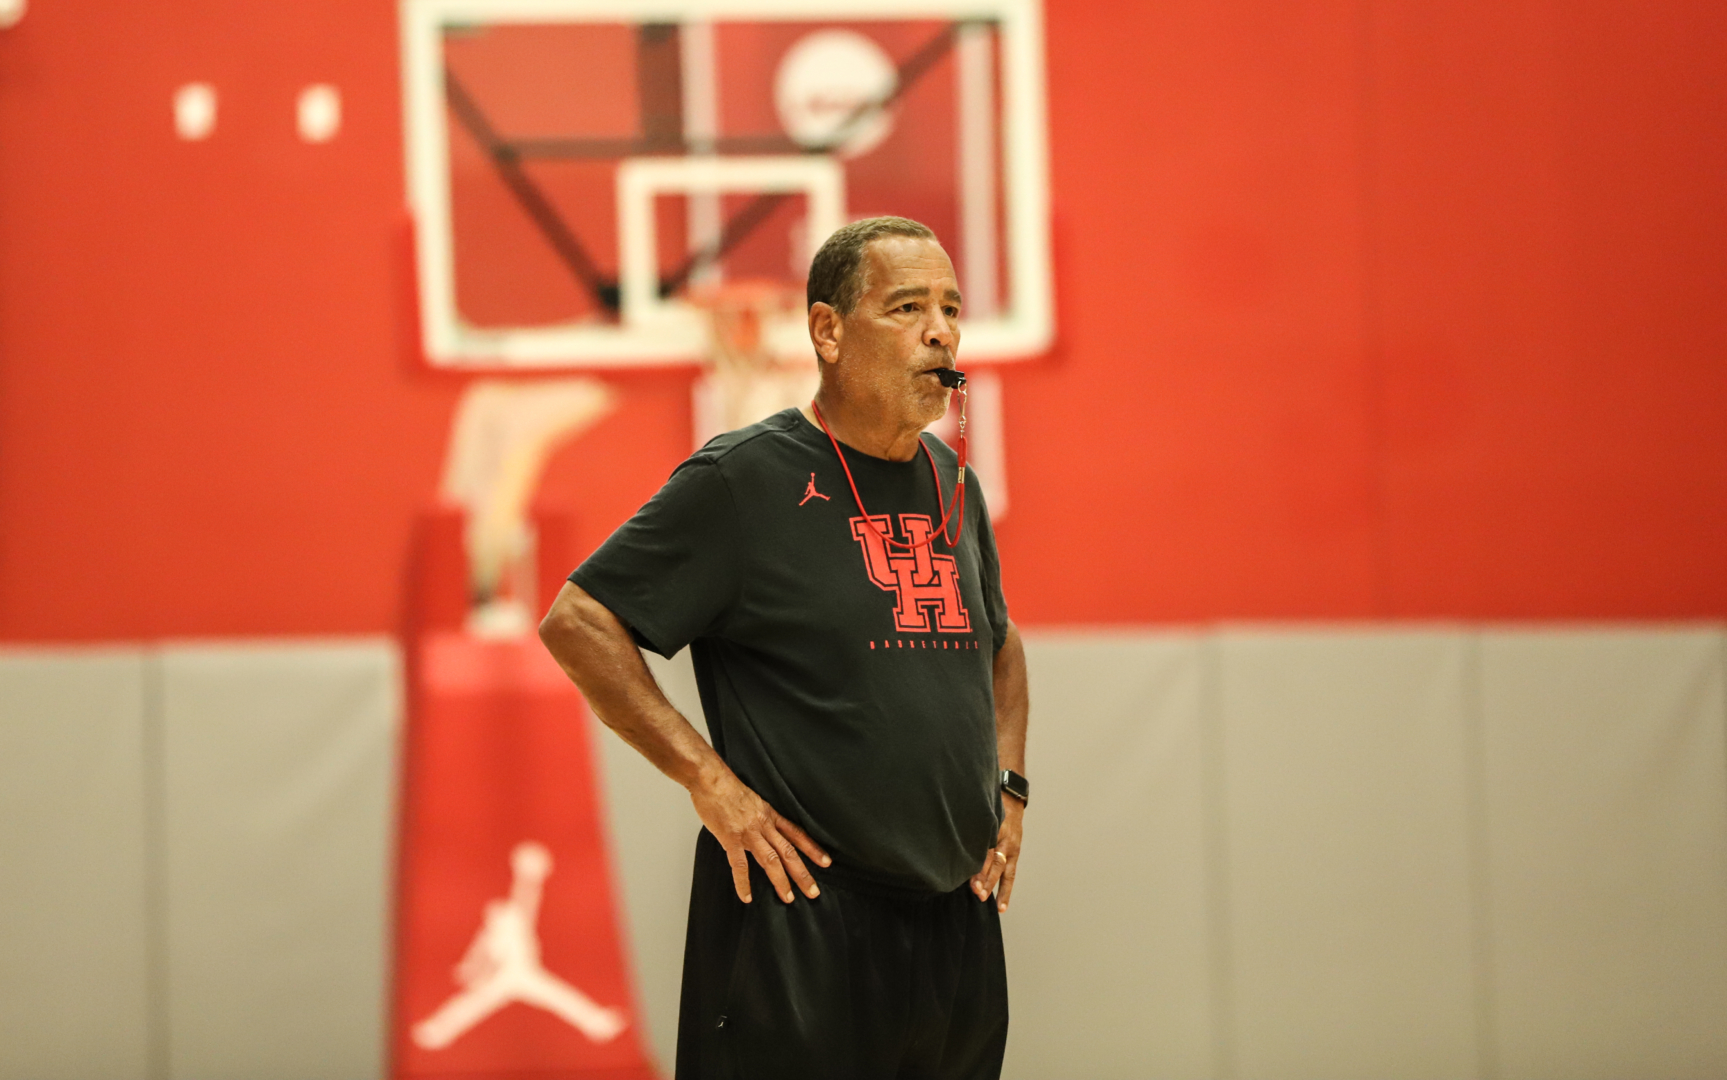 With a victory over Northern Colorado on Nov. 7, UH men's basketball head coach Kelvin Sampson would reach 700 career collegiate wins and 200 with the Cougars. | Sean Thomas/The Cougar